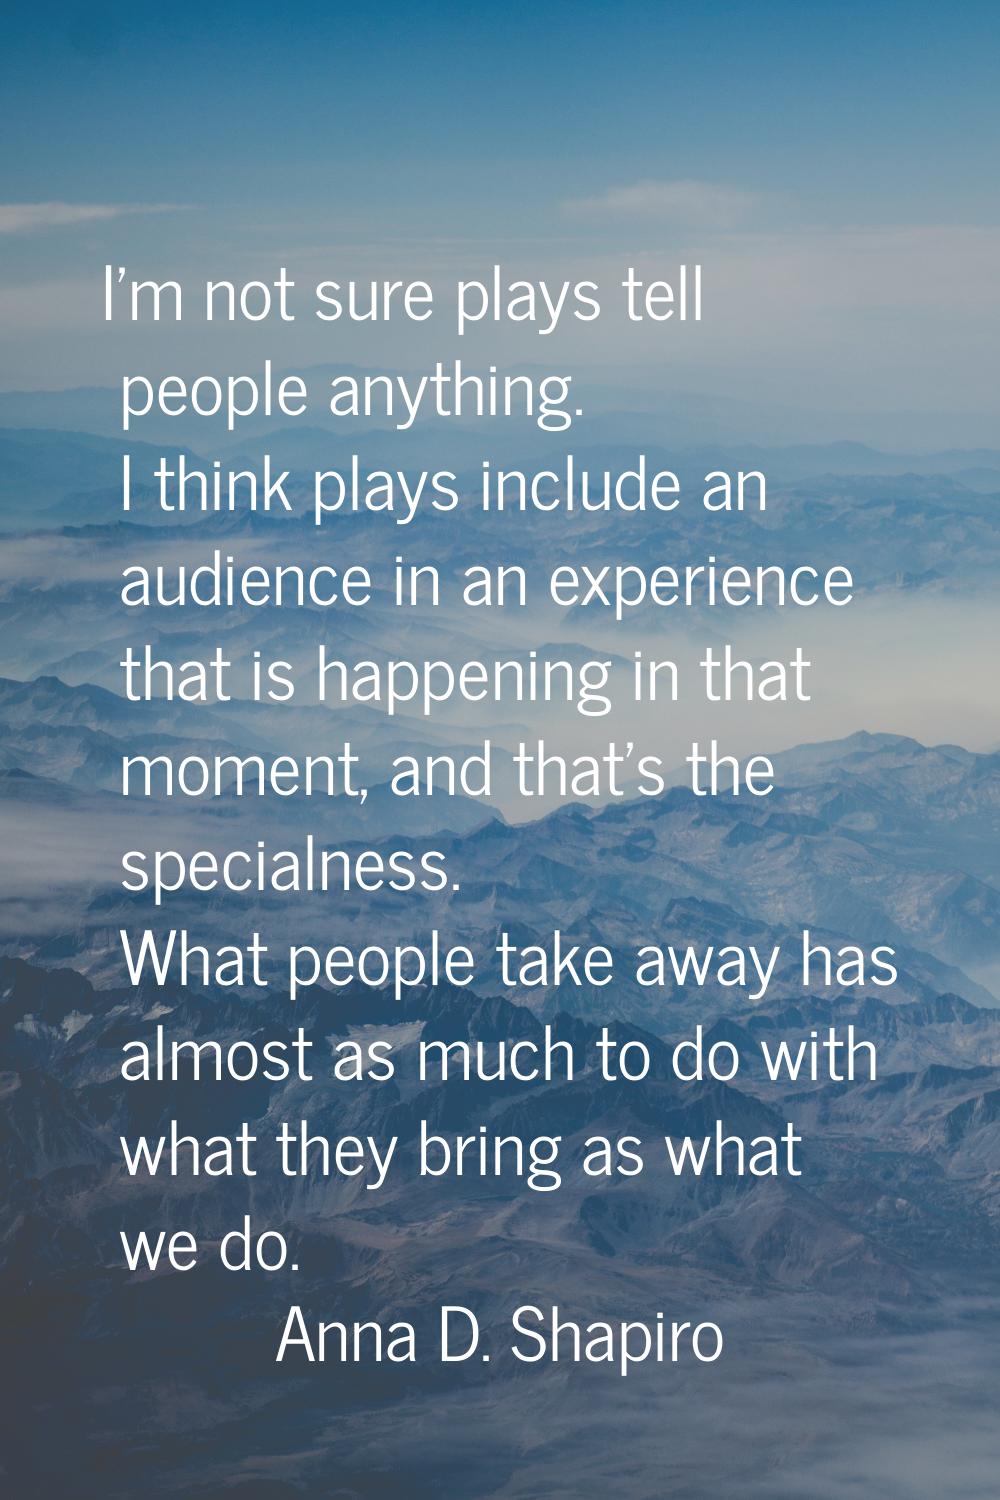 I'm not sure plays tell people anything. I think plays include an audience in an experience that is